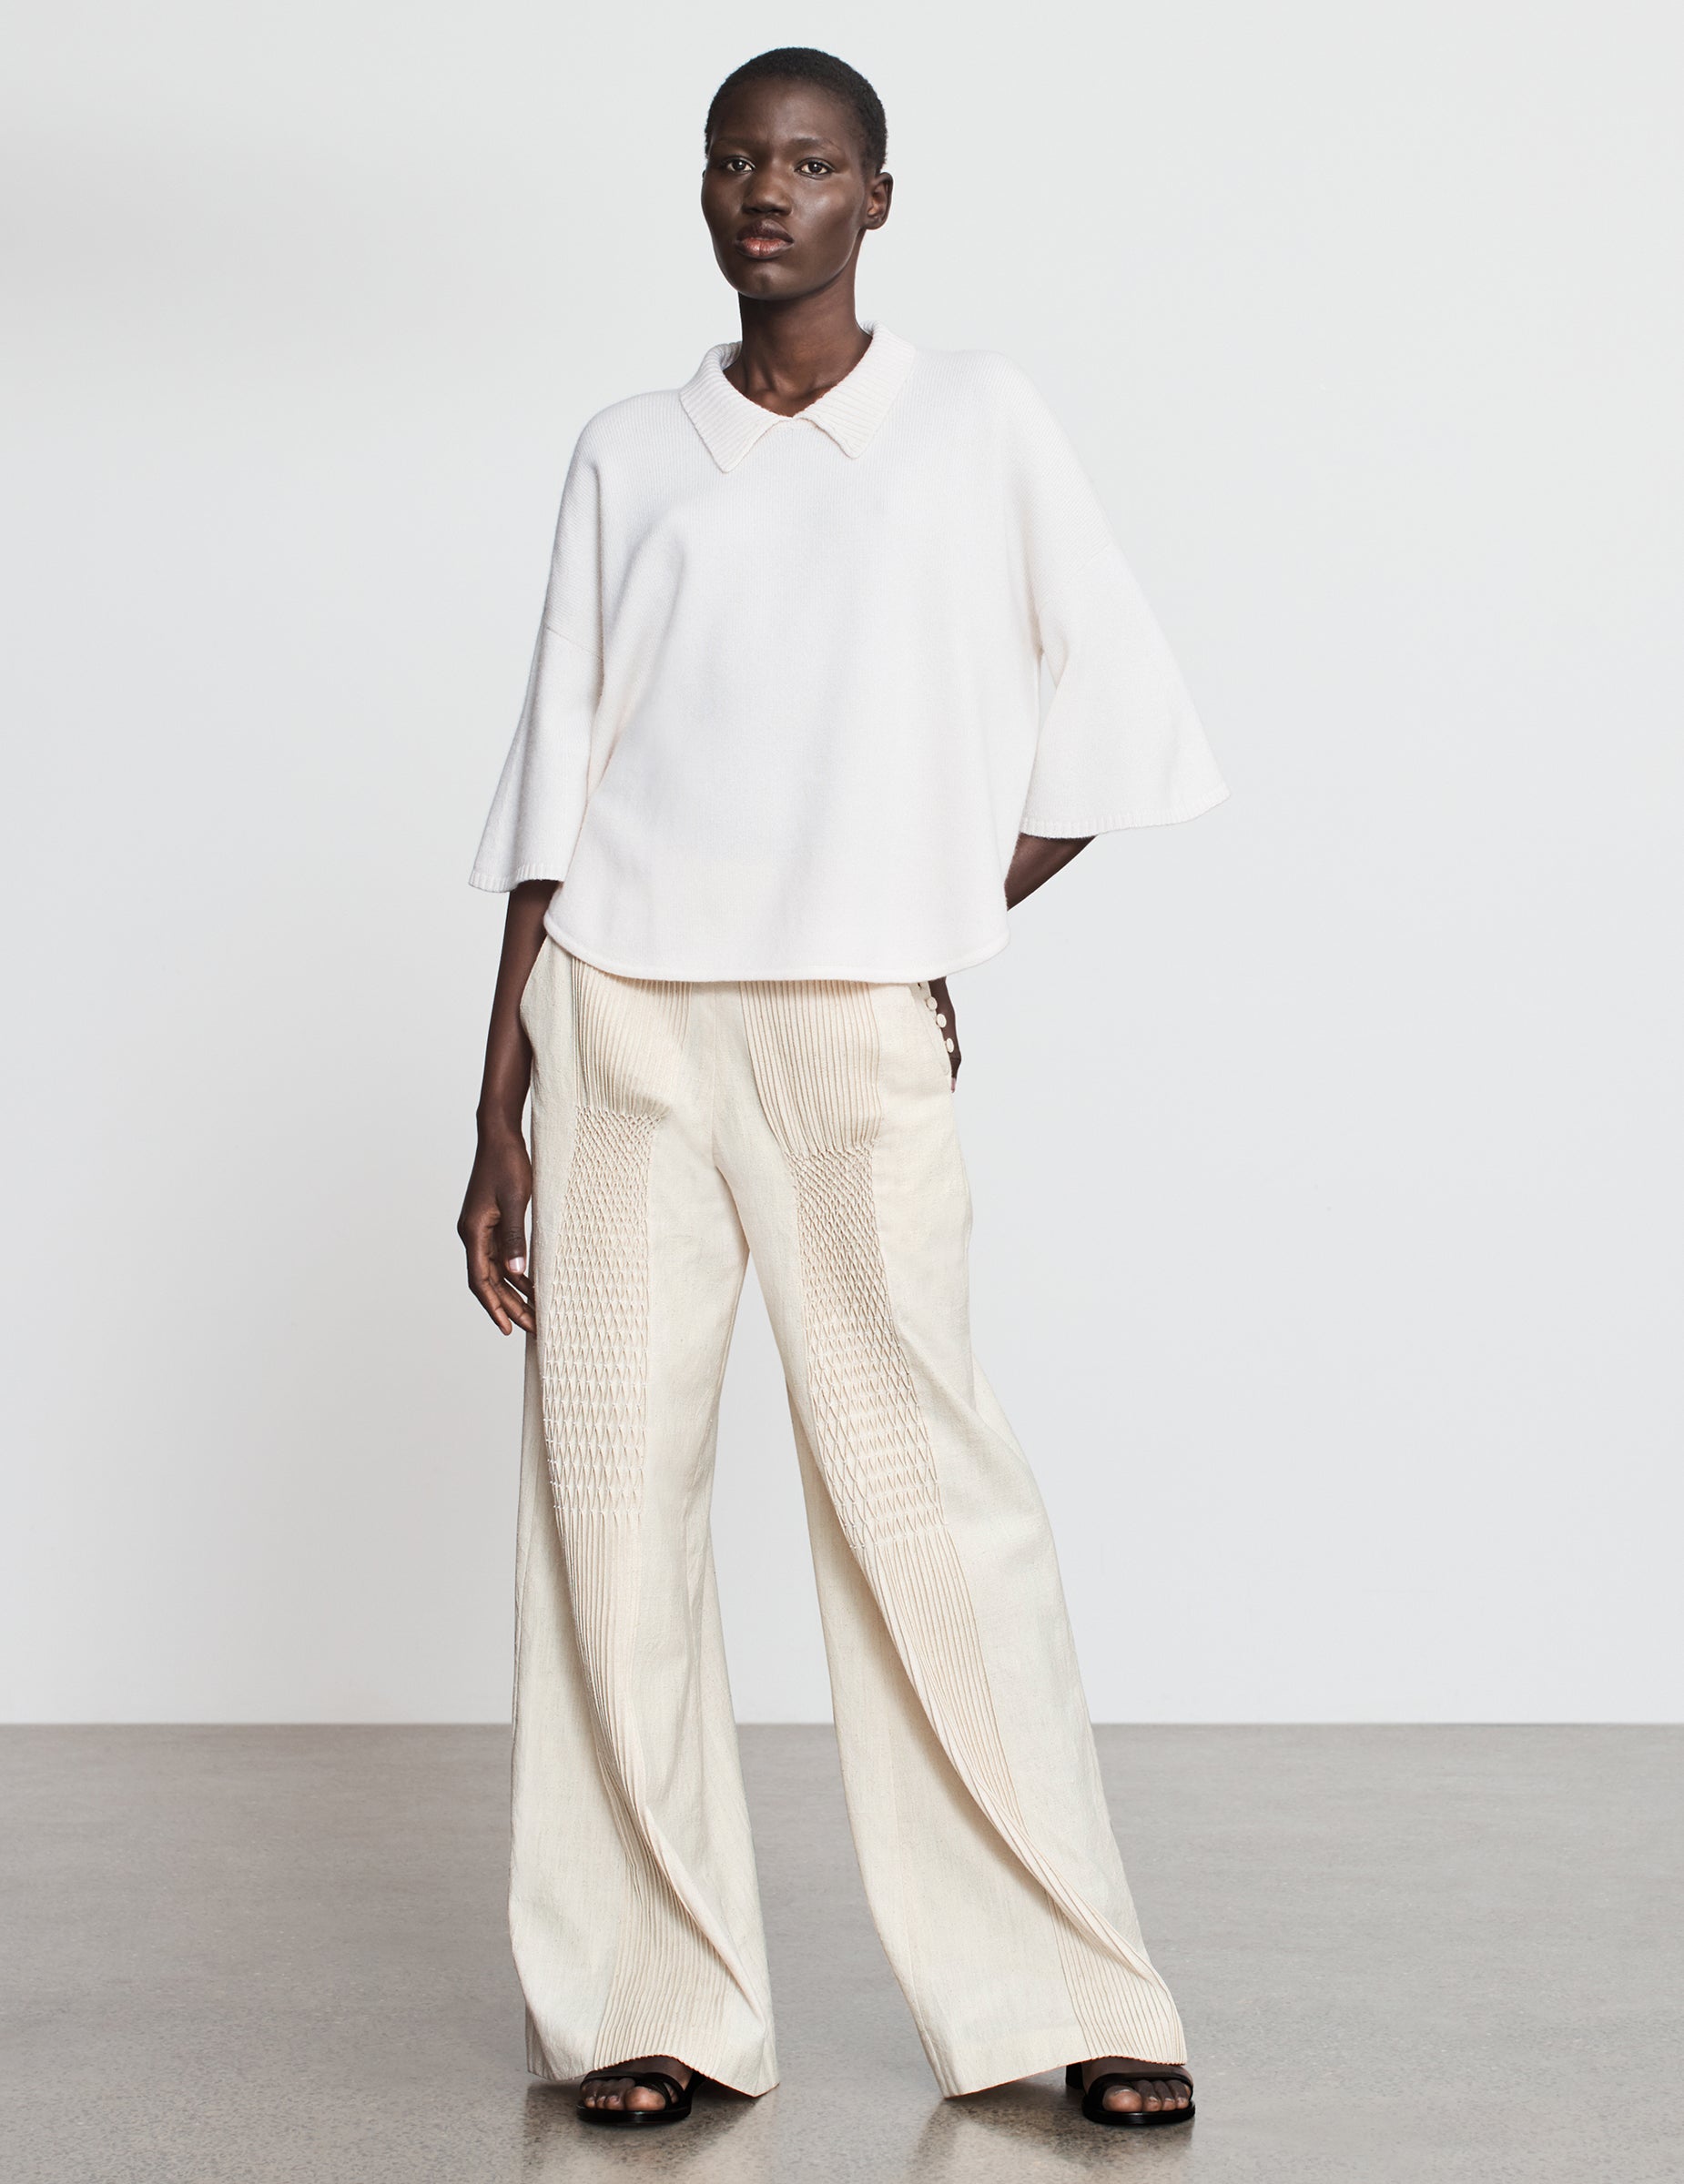 Buy Cream Trousers  Pants for Women by Marks  Spencer Online  Ajiocom